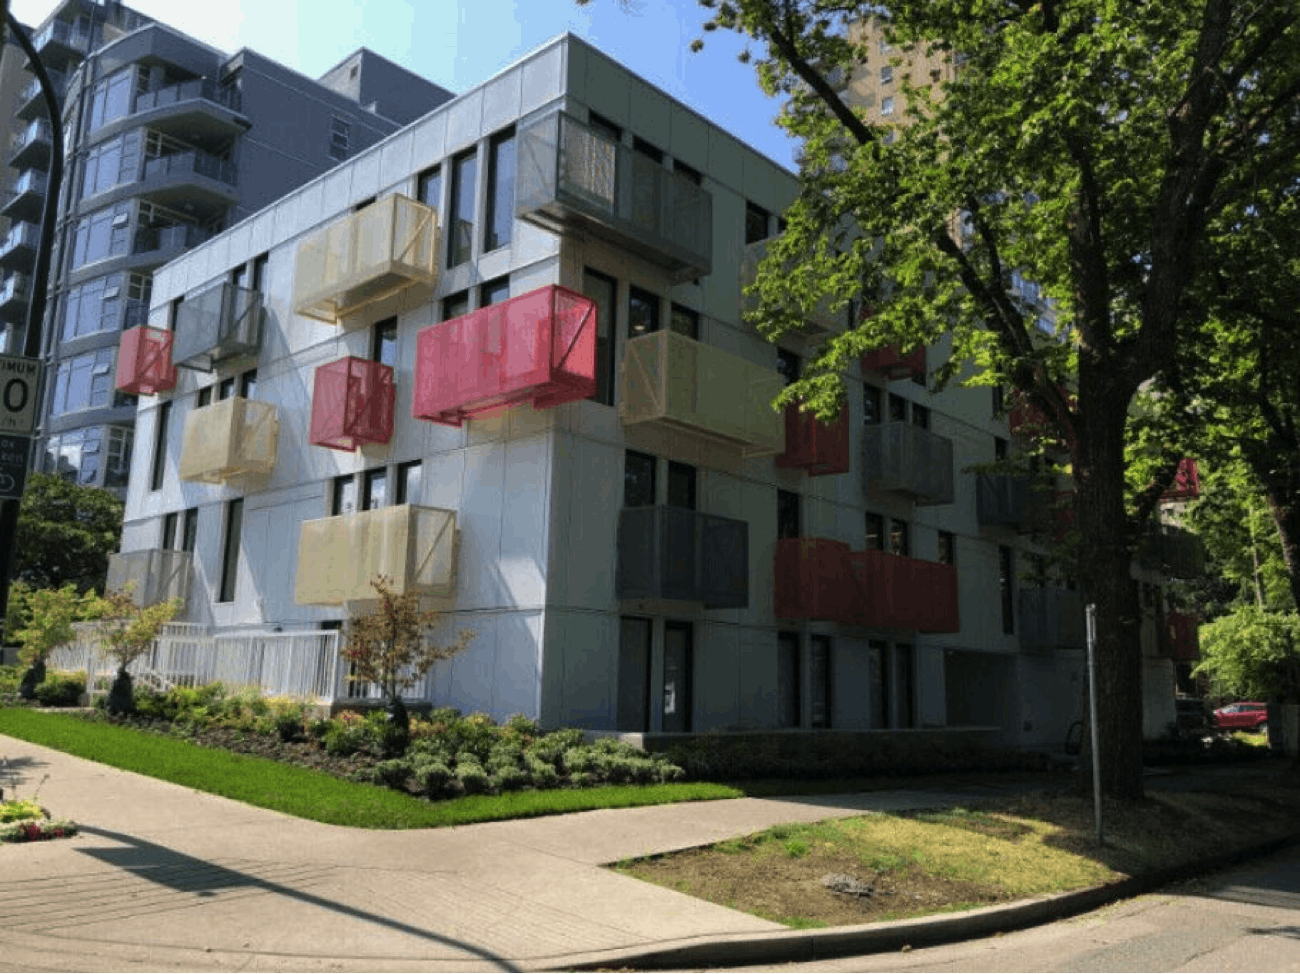 Example of simplified building design (simple architecture) on a 4-storey apartment building 